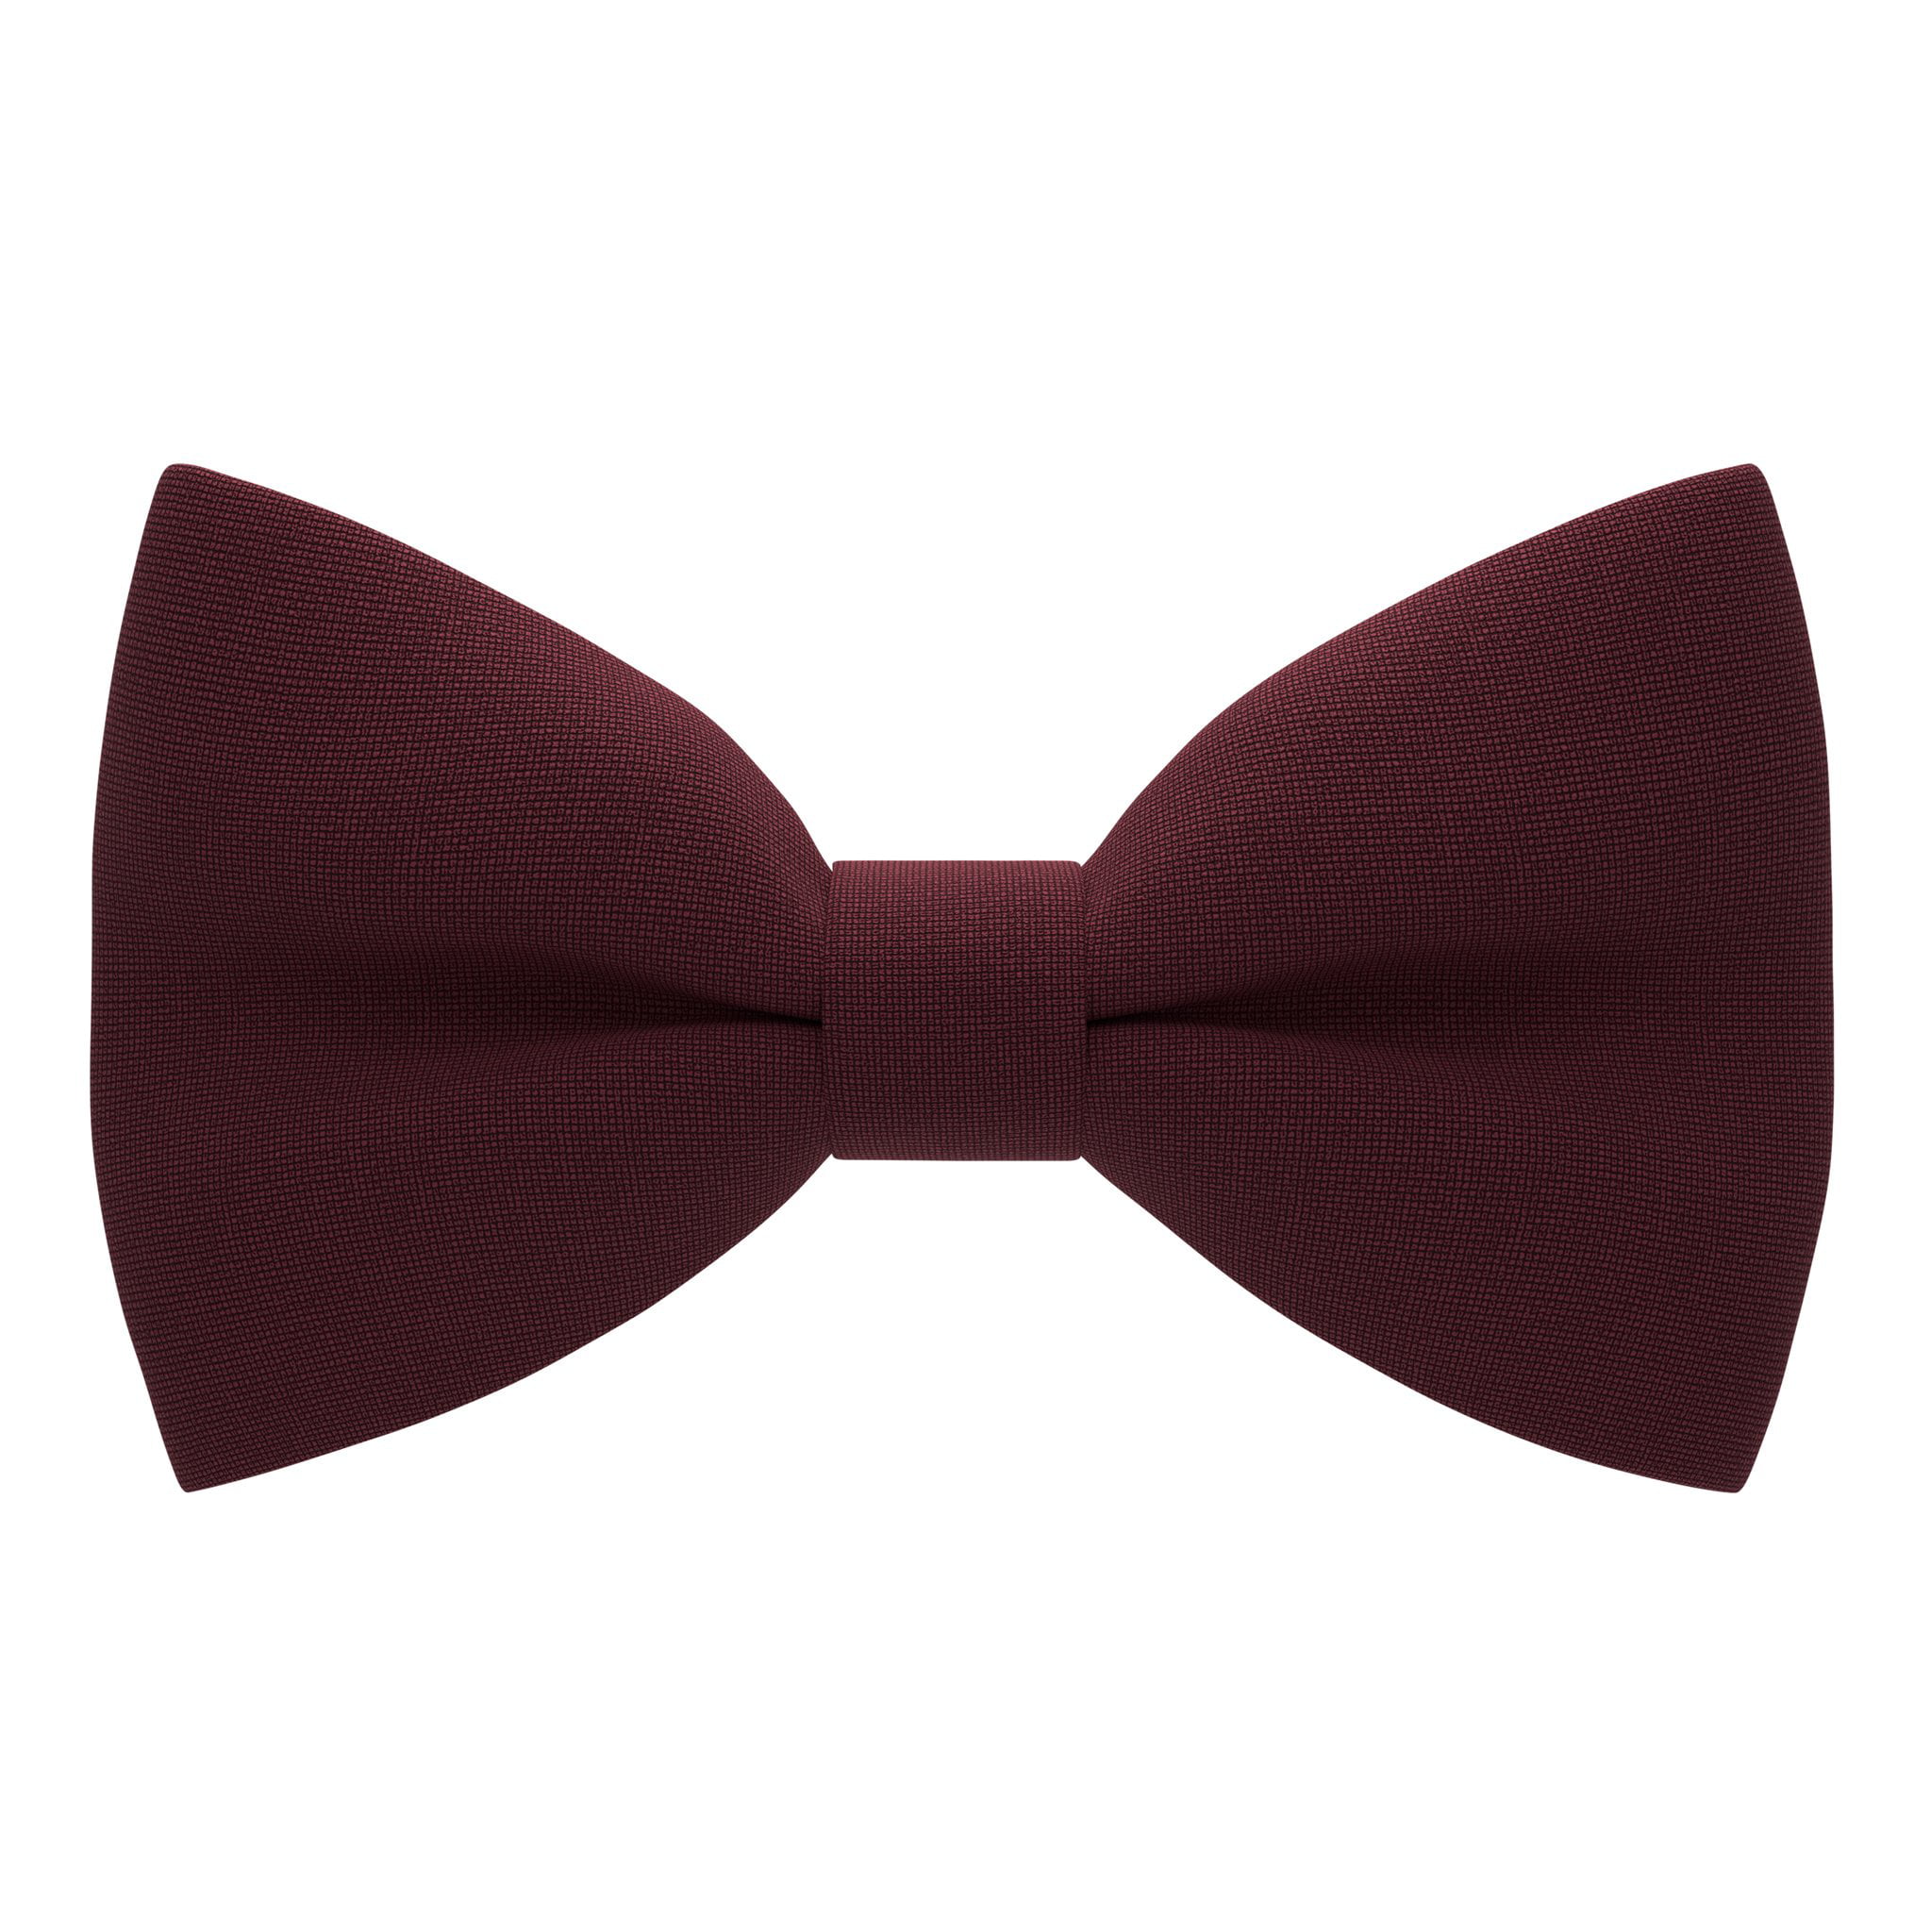 butterfly bow tie Red linen bow tie wedding bow ties pre tied bow ties Burgundy Red bow tie